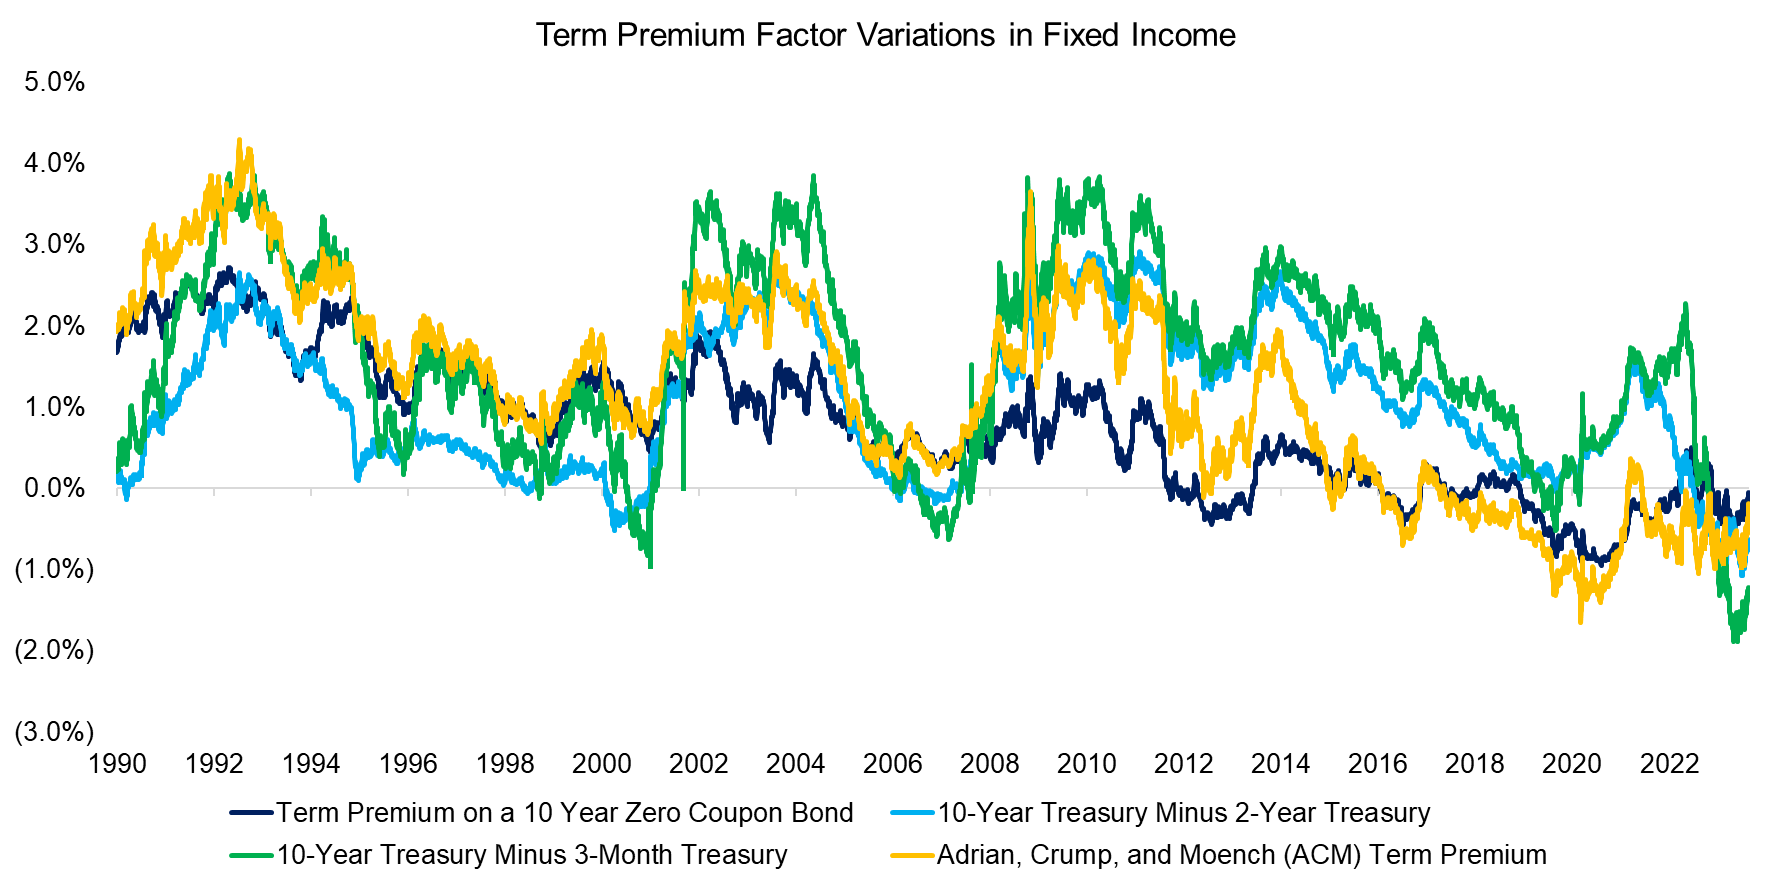 Term Premium Factor Variations in Fixed Income